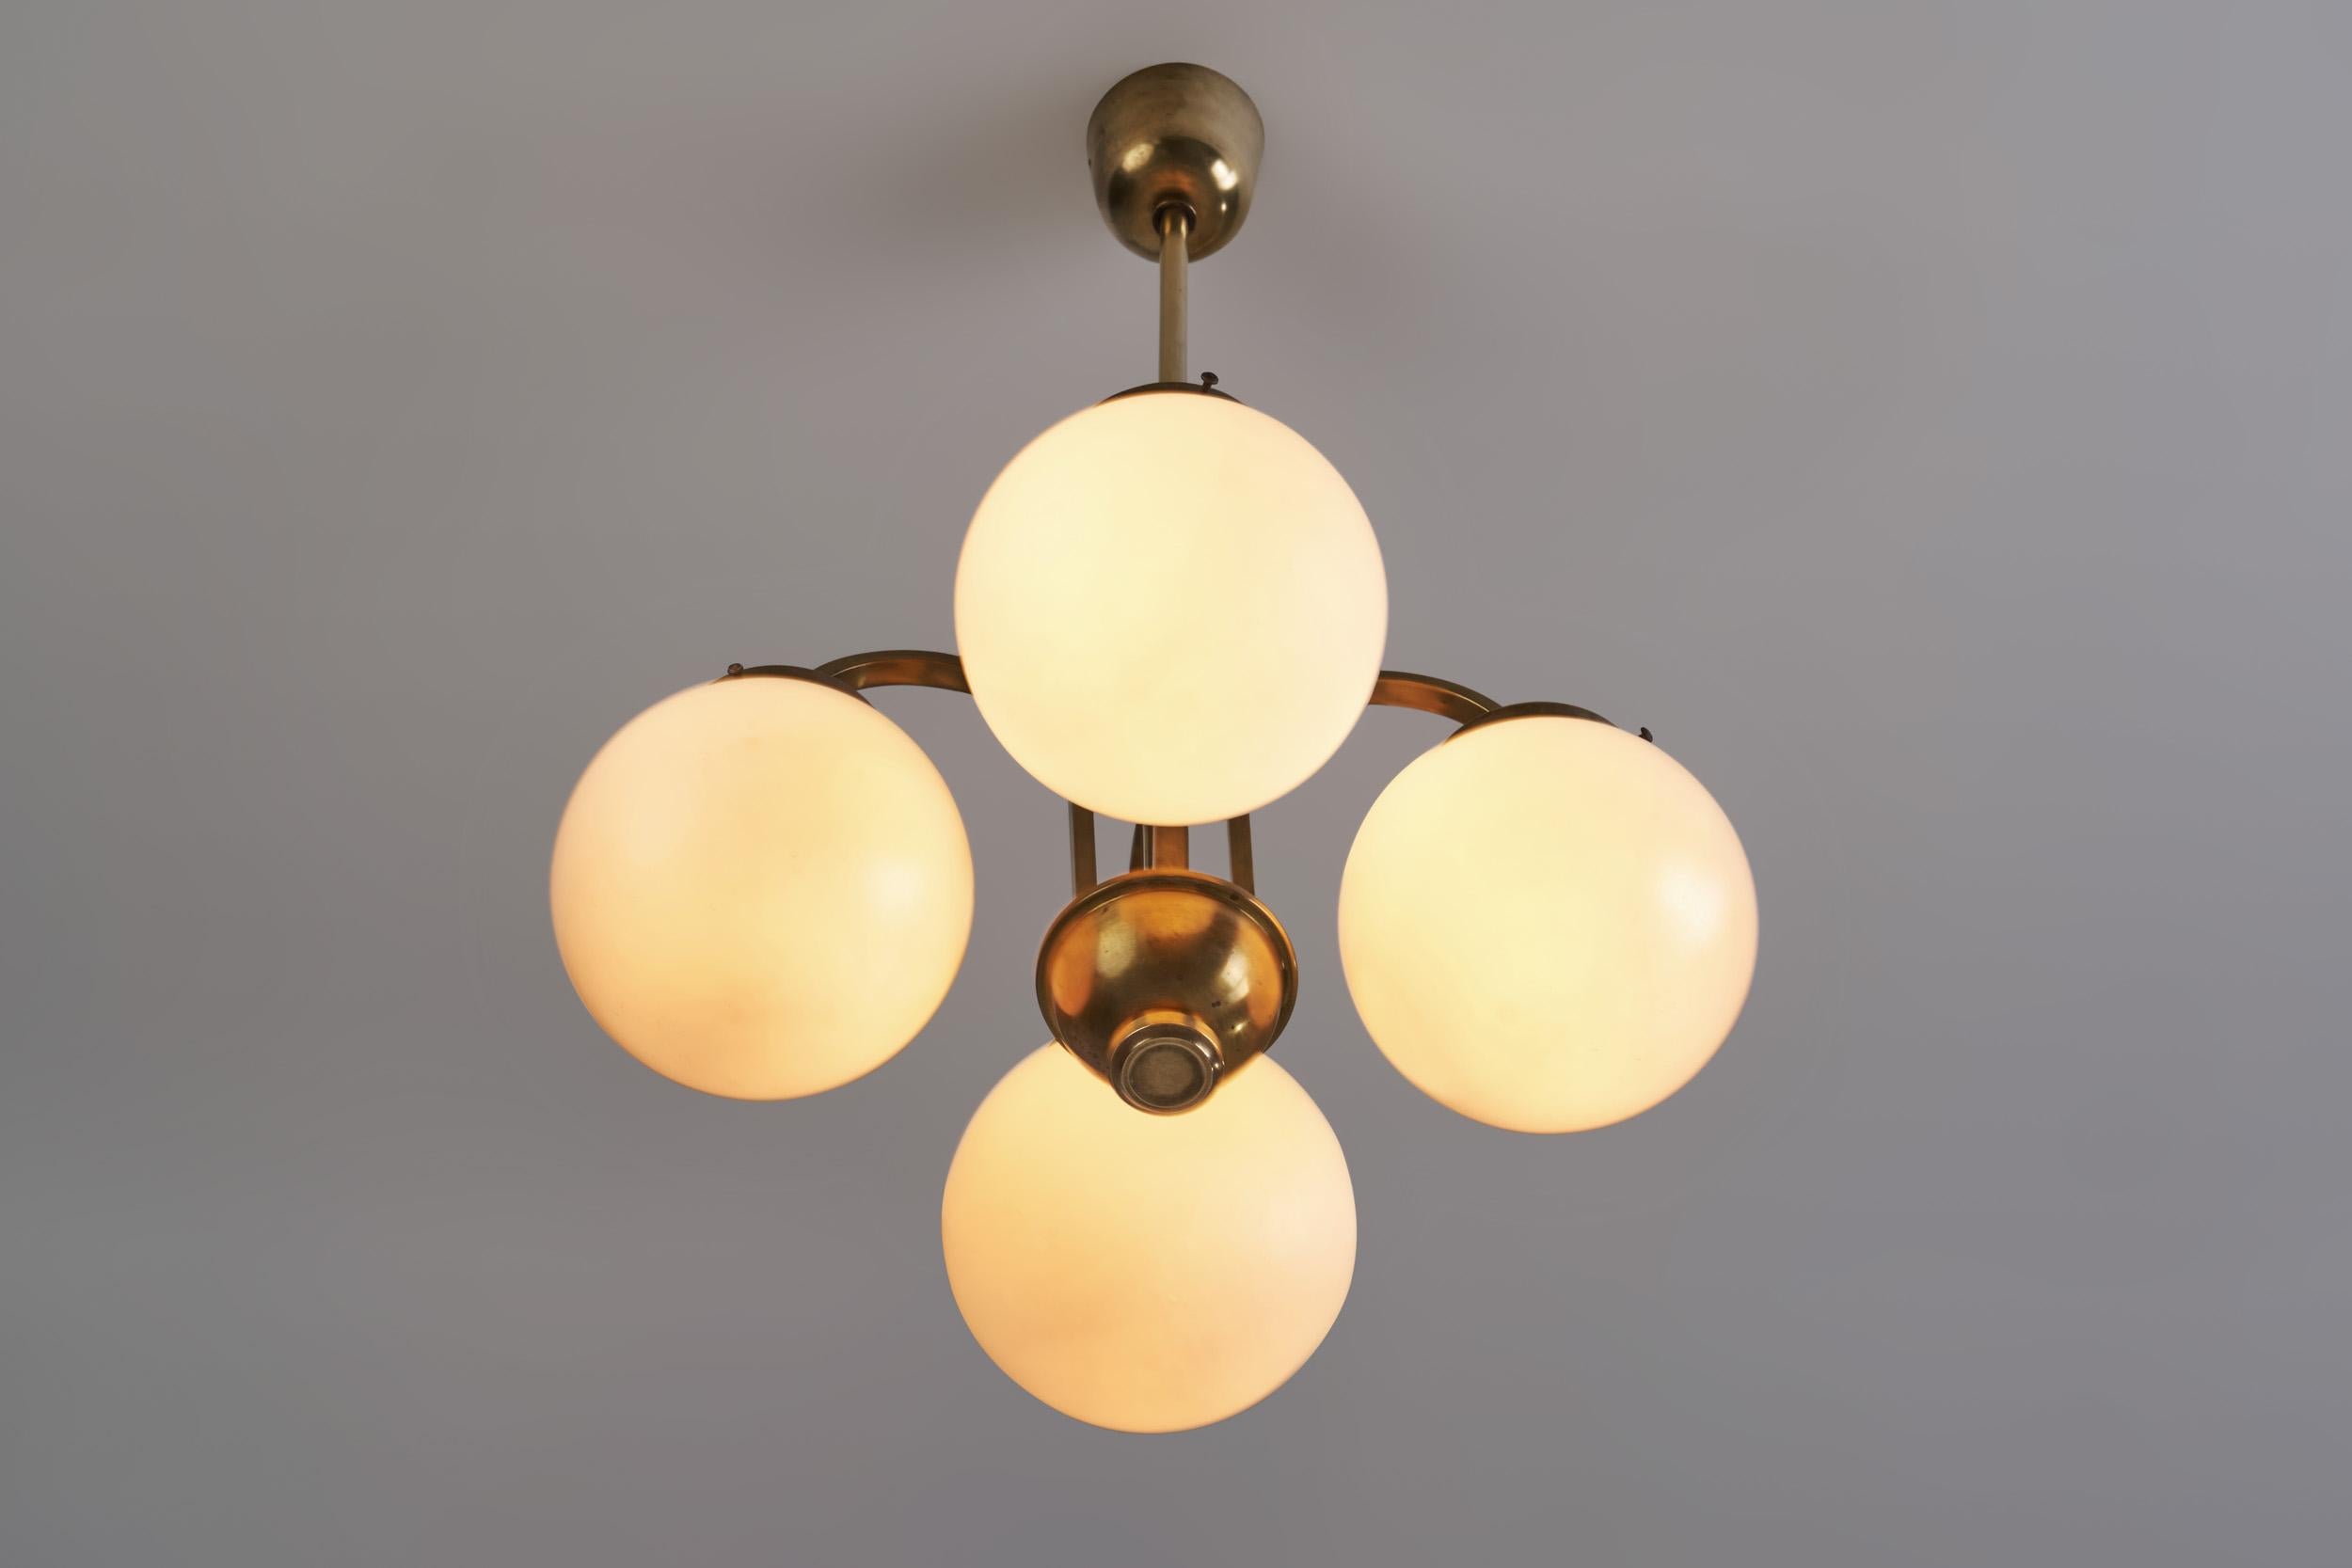 Curved Ceiling Lamp with Four Opal Glass Shades, Europe 1940s For Sale 2